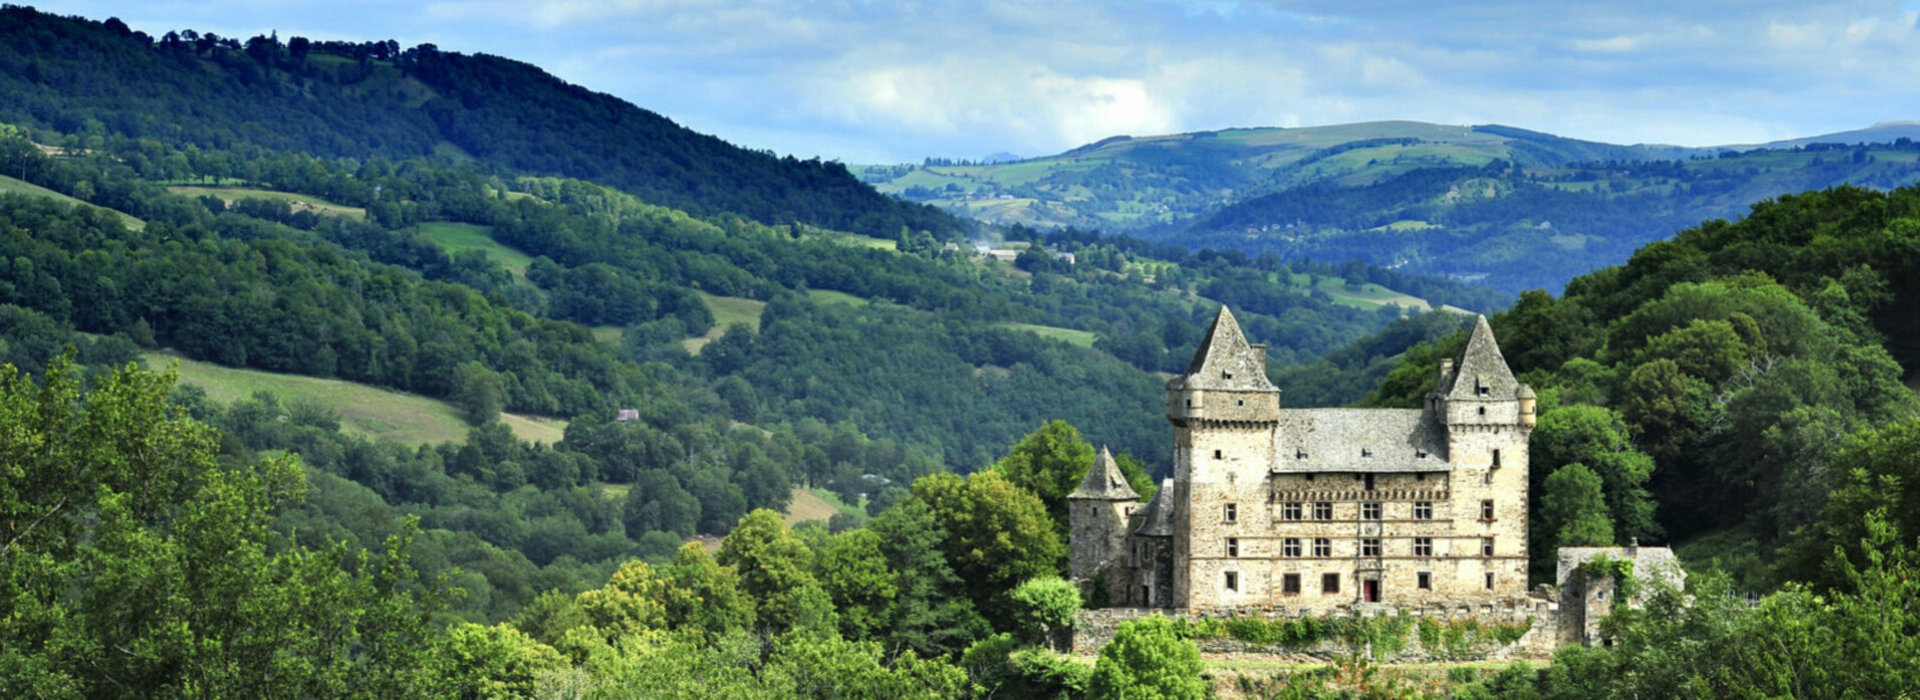 Visite chateau Cantal Aveyron : Messilhac (Raulhac)